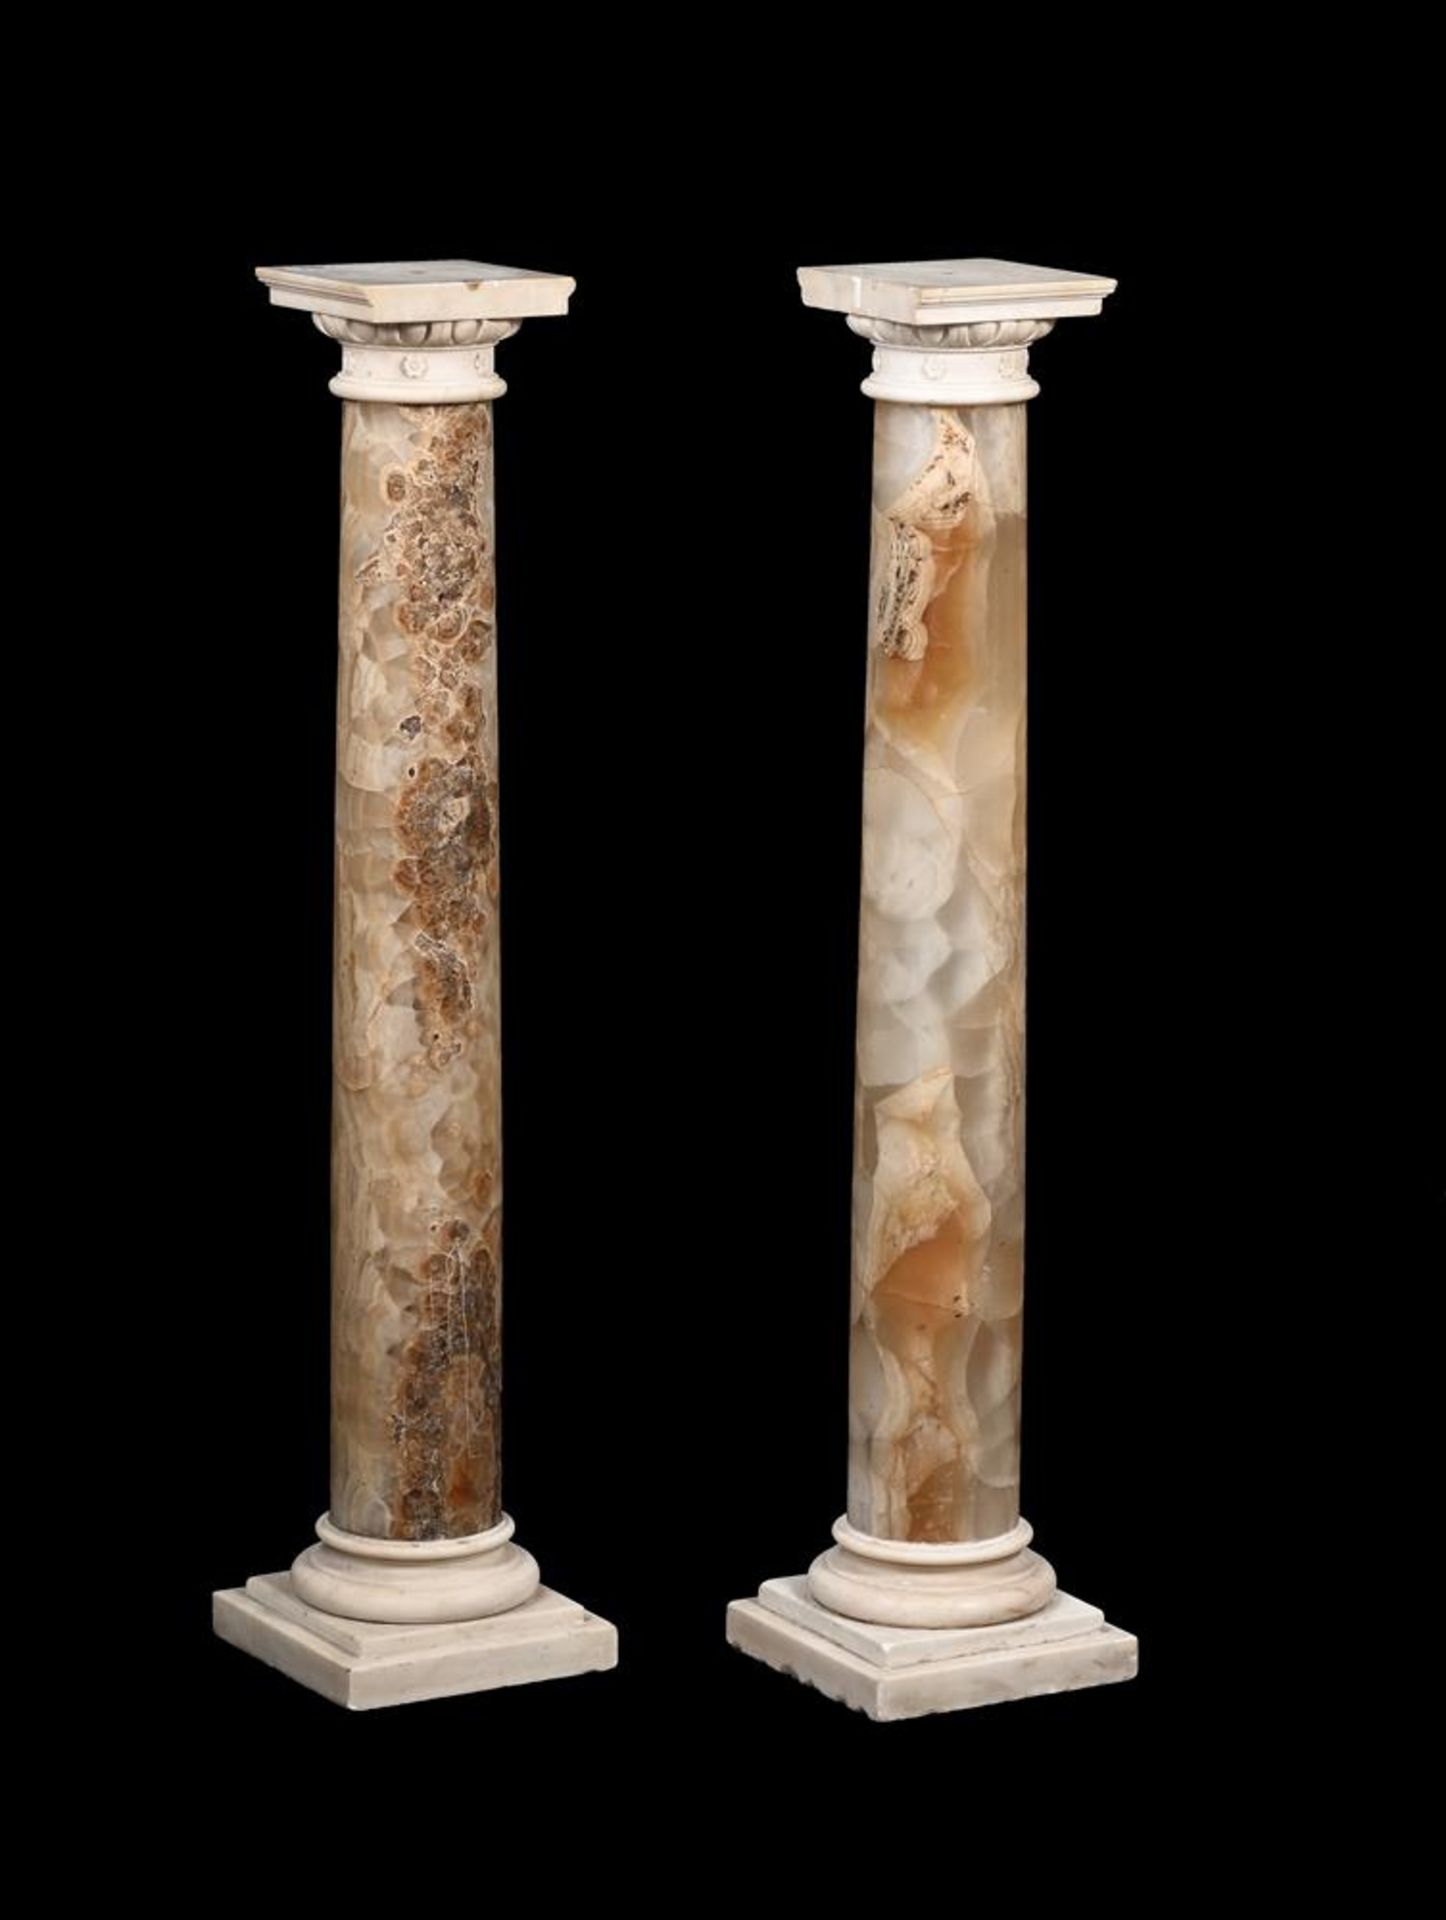 A GOOD PAIR OF FIGURED ALABASTER AND STATUARY MARBLE PEDESTALS, 18TH CENTURY